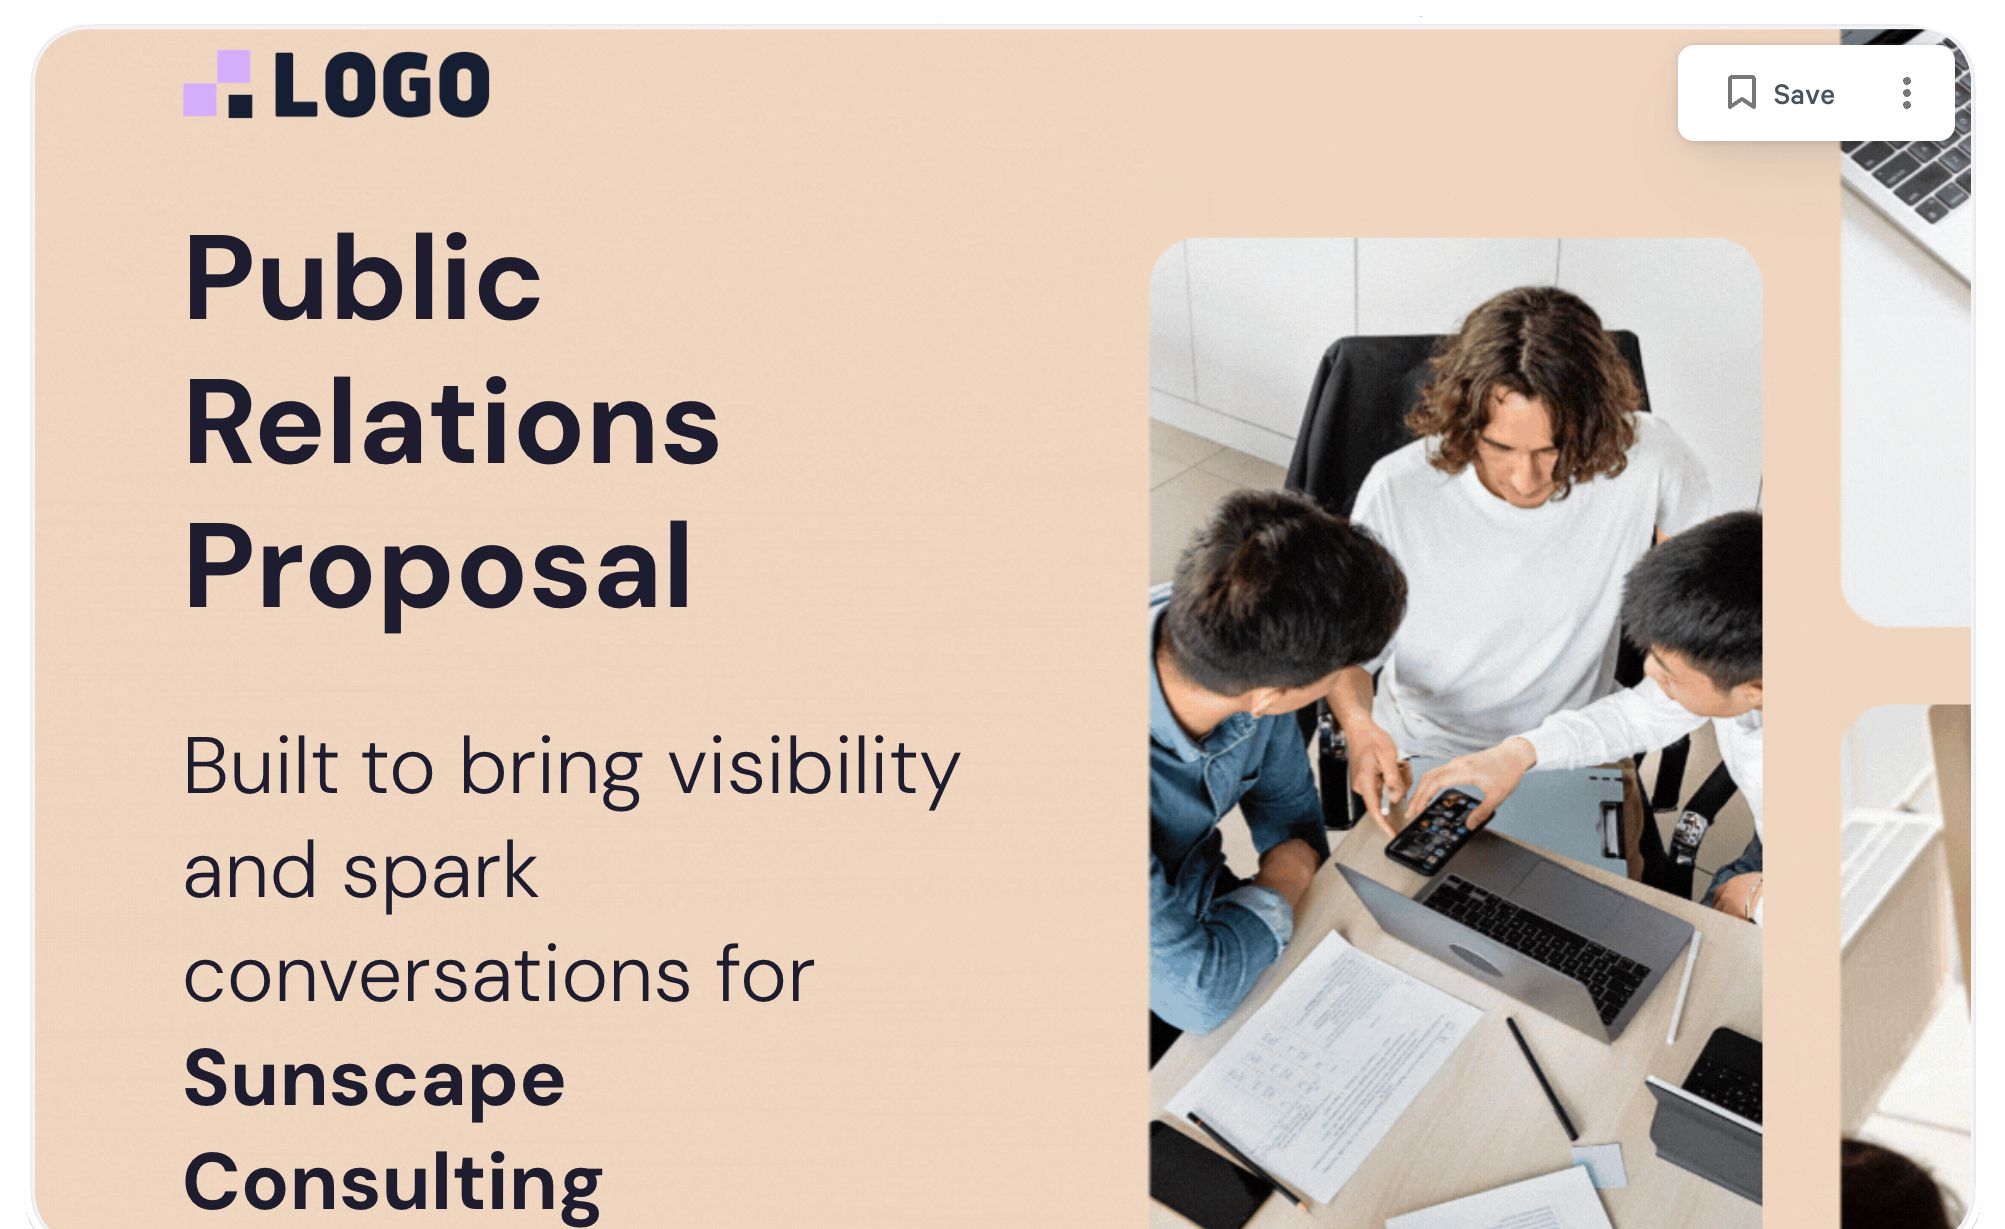 Public Relations Proposal Template